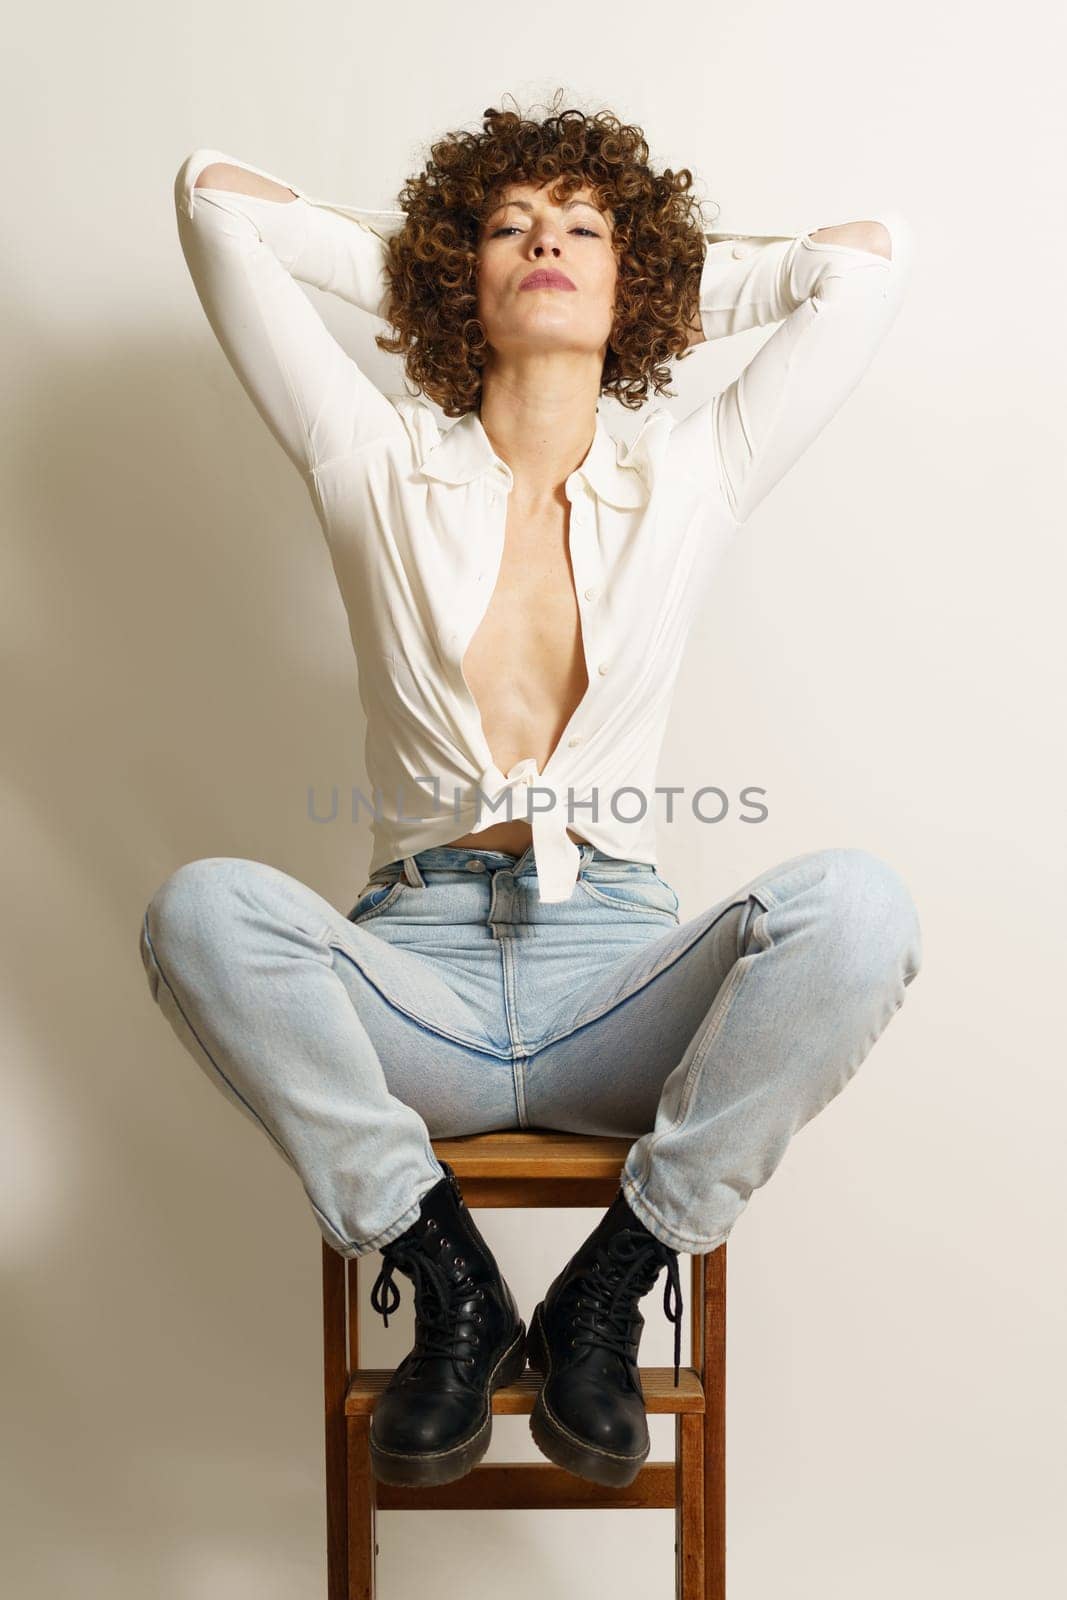 Arrogant woman chilling on chair by javiindy